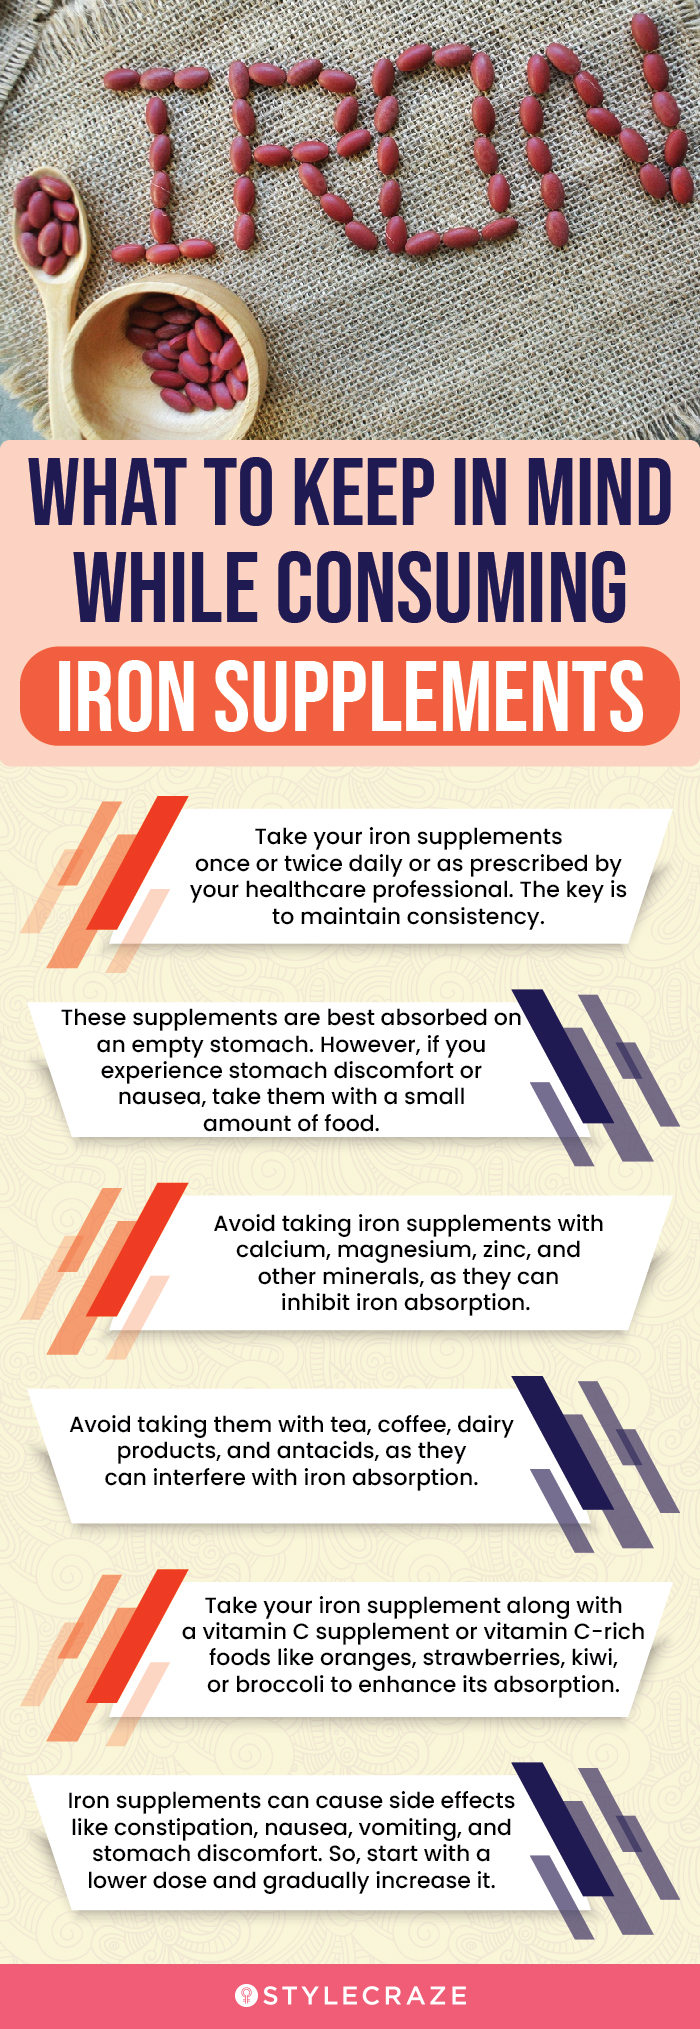 What To Keep In Mind While Consuming Iron Supplements(infographic)